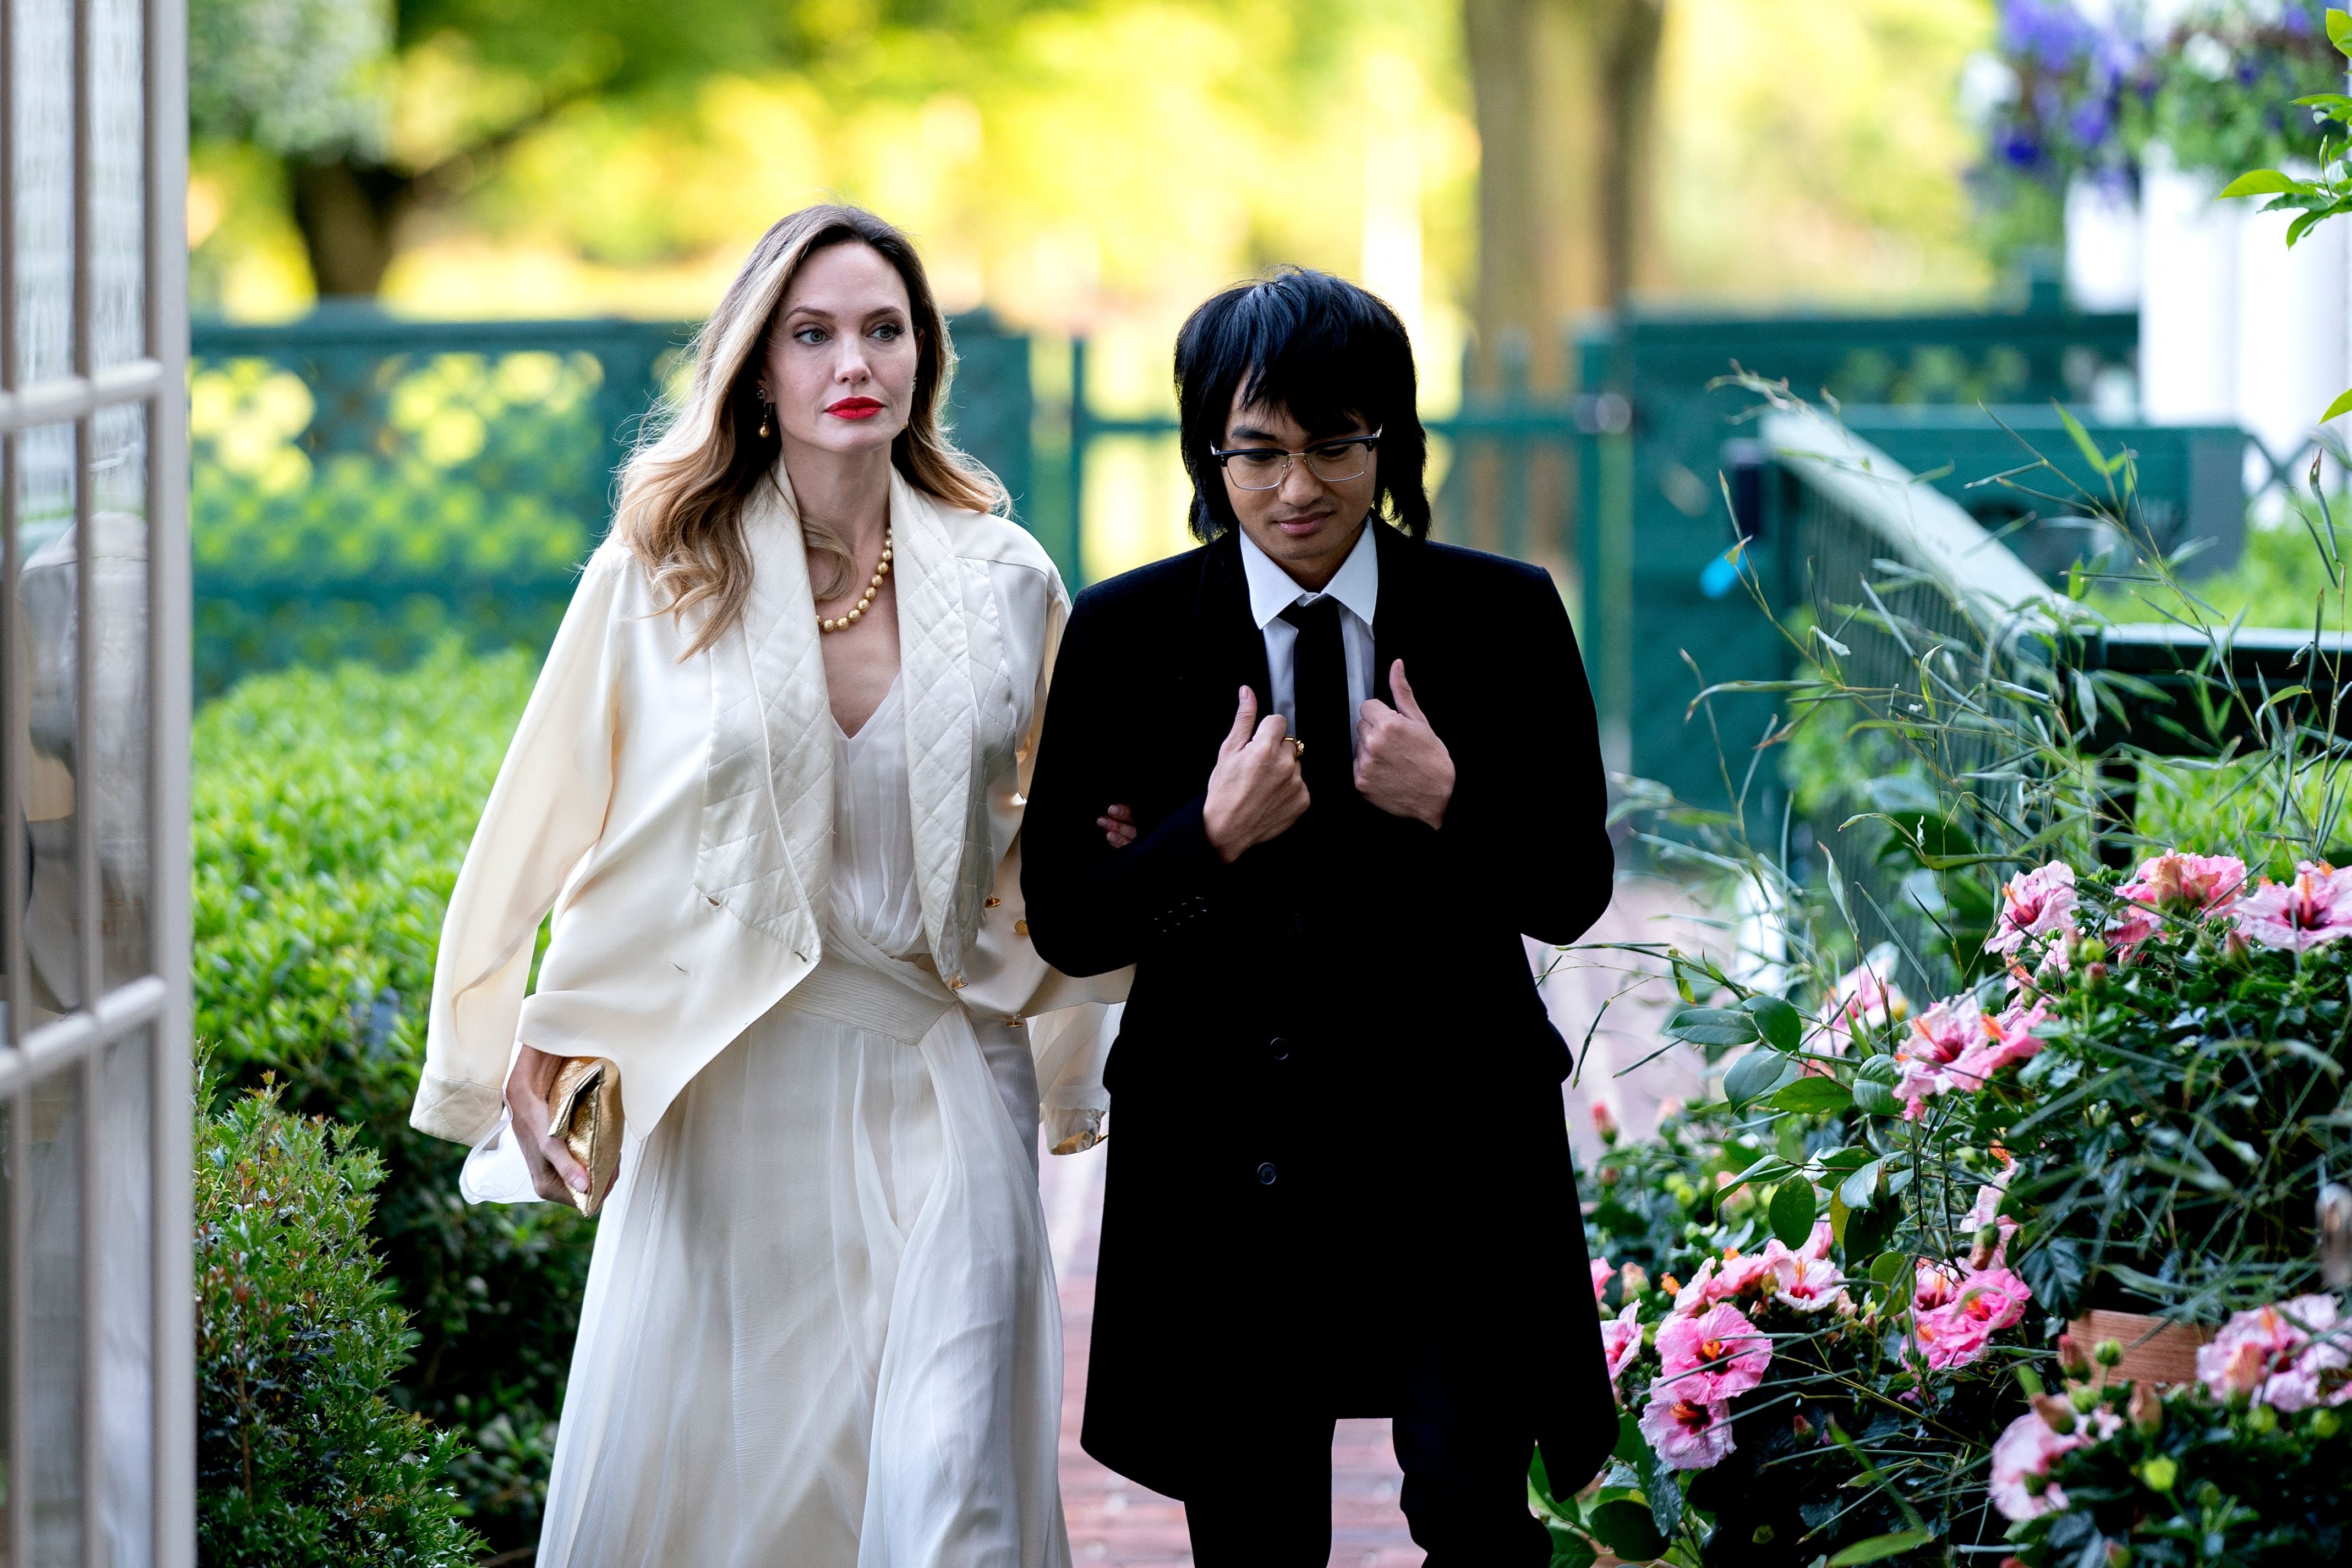 Angelina Jolie and Son Maddox Attend State Dinner, Share Rude